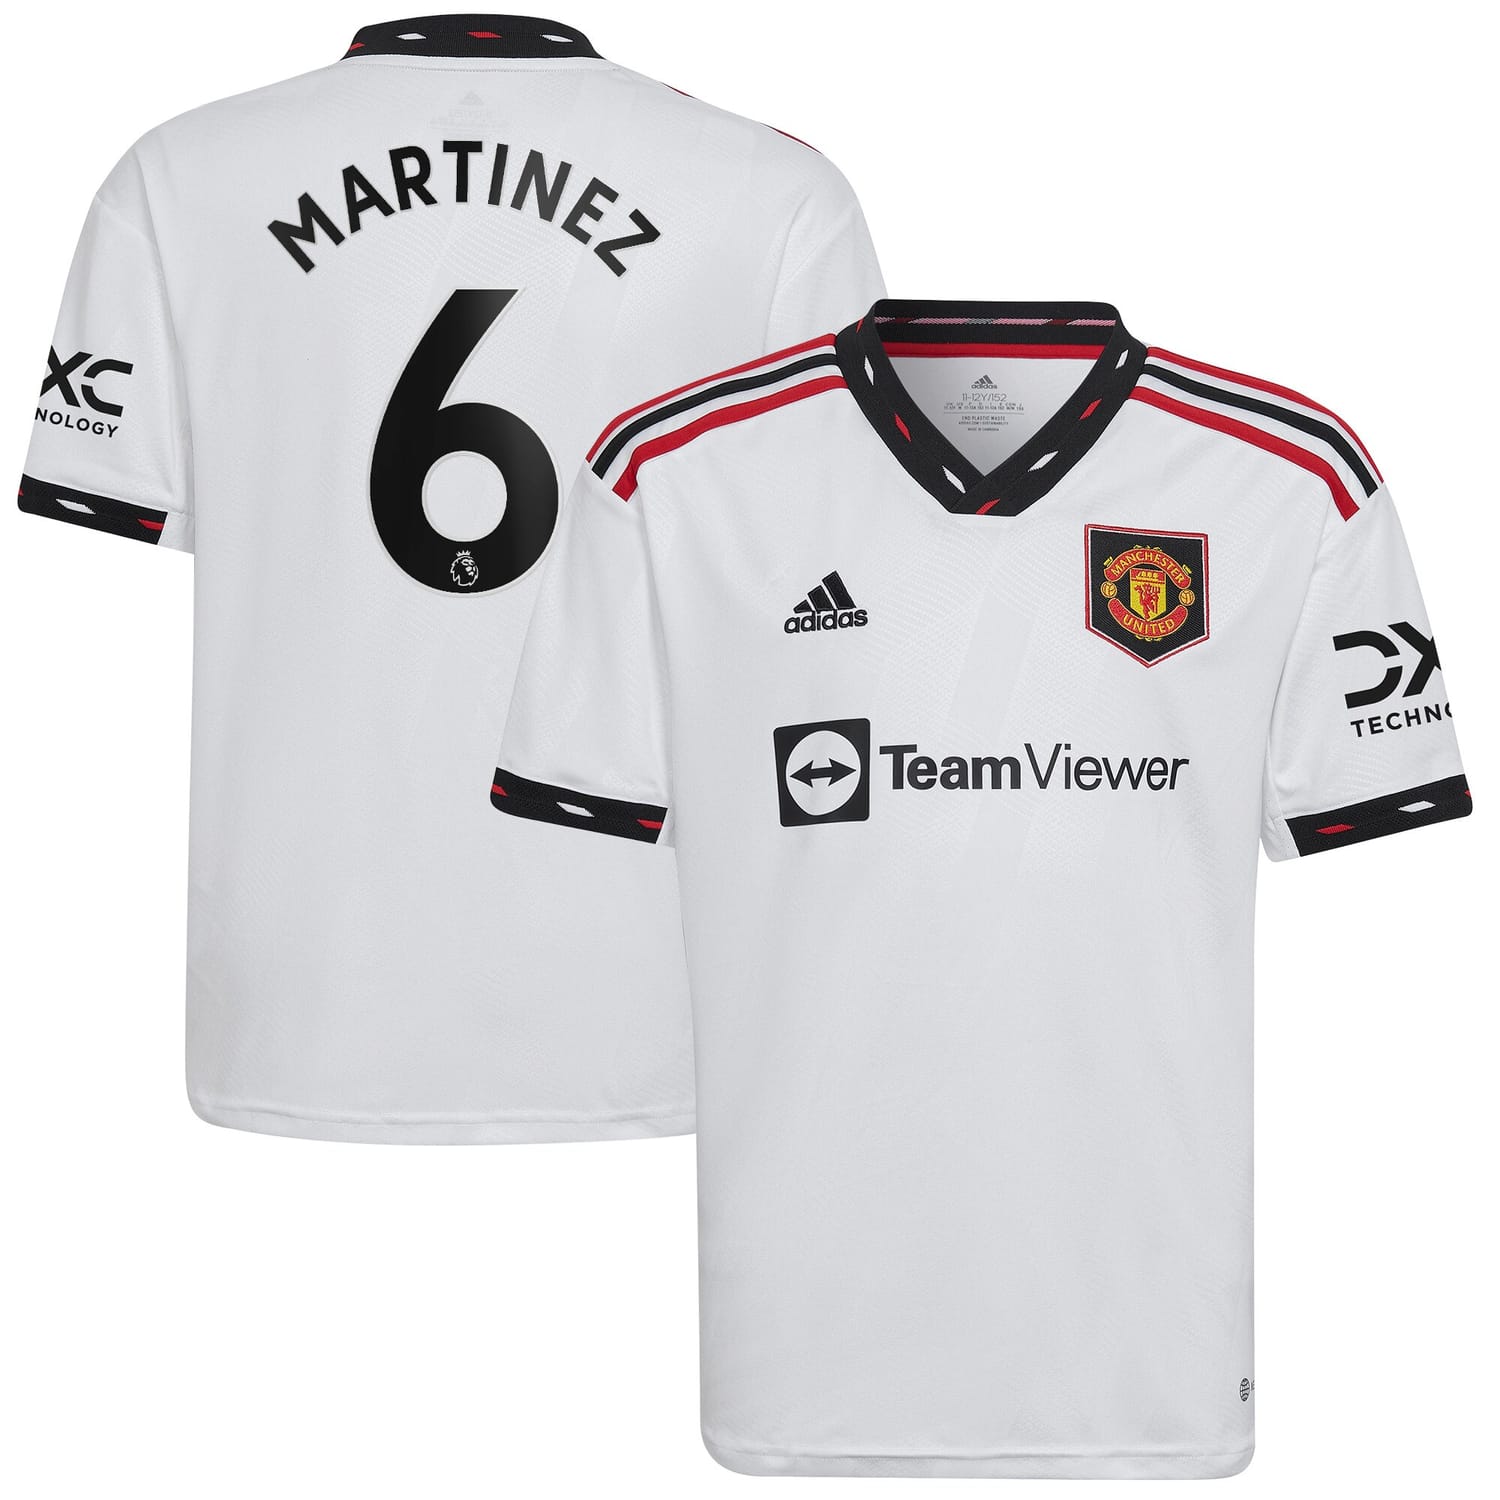 Premier League Manchester United Away Jersey Shirt White 2022-23 player Lisandro Martínez printing for Women